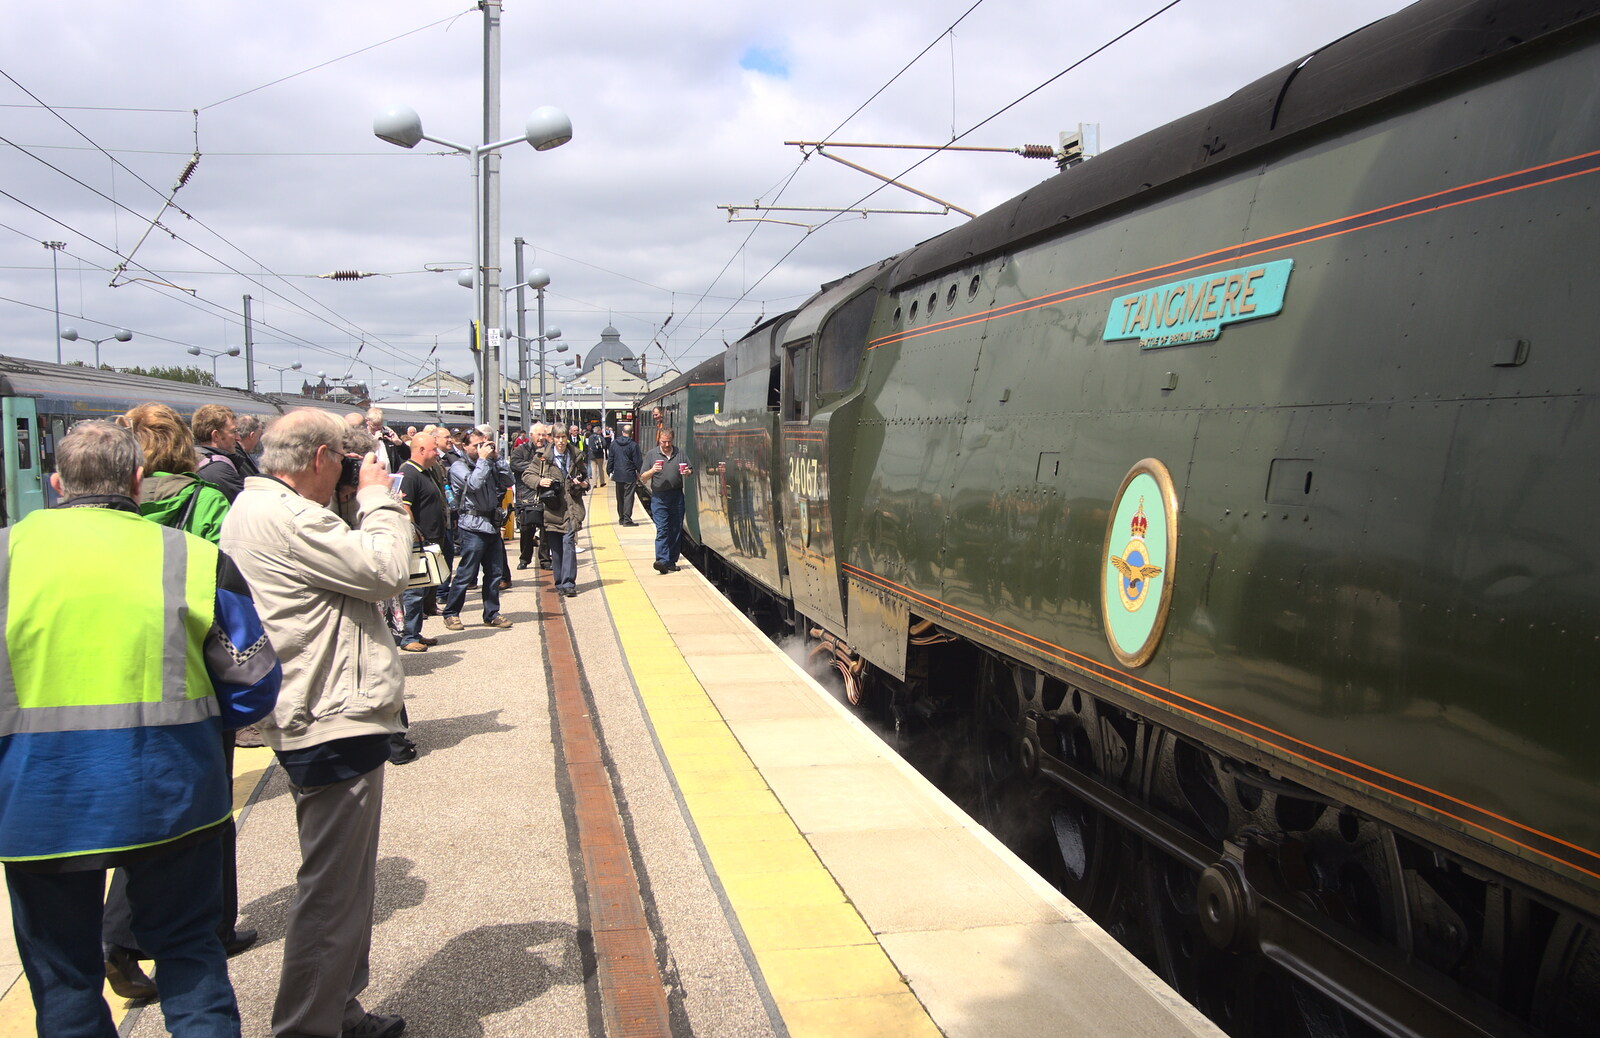 34067 Tangmere and its RAF crest from Tangmere at Norwich Station, Norwich, Norfolk - 25th May 2013